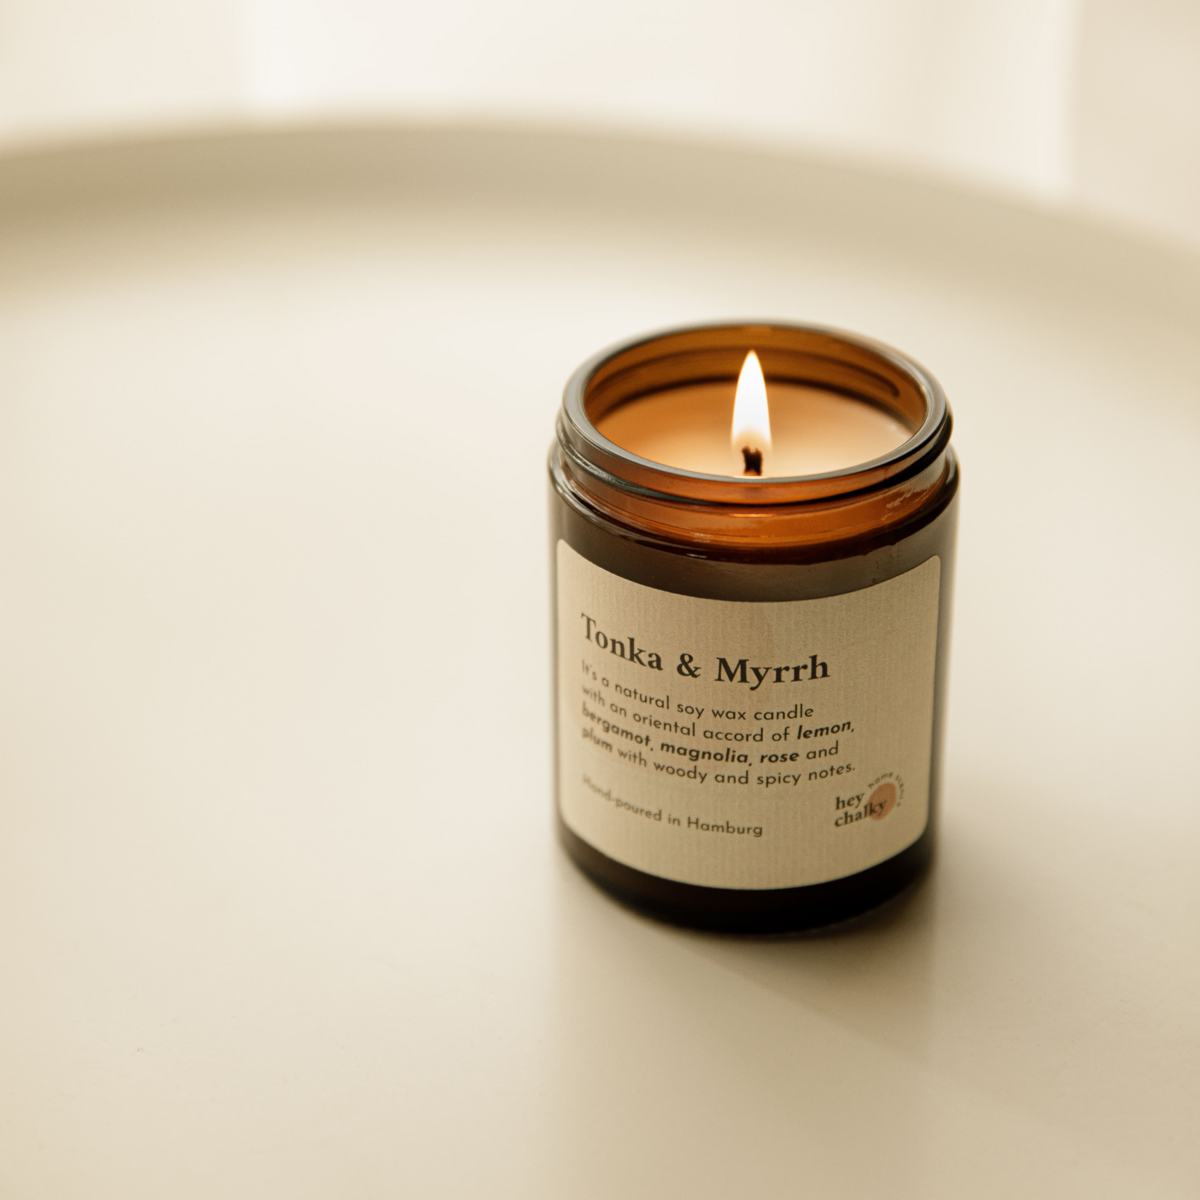 Candle "Tonka & Myrrh" 155 g - scented candle in a glass